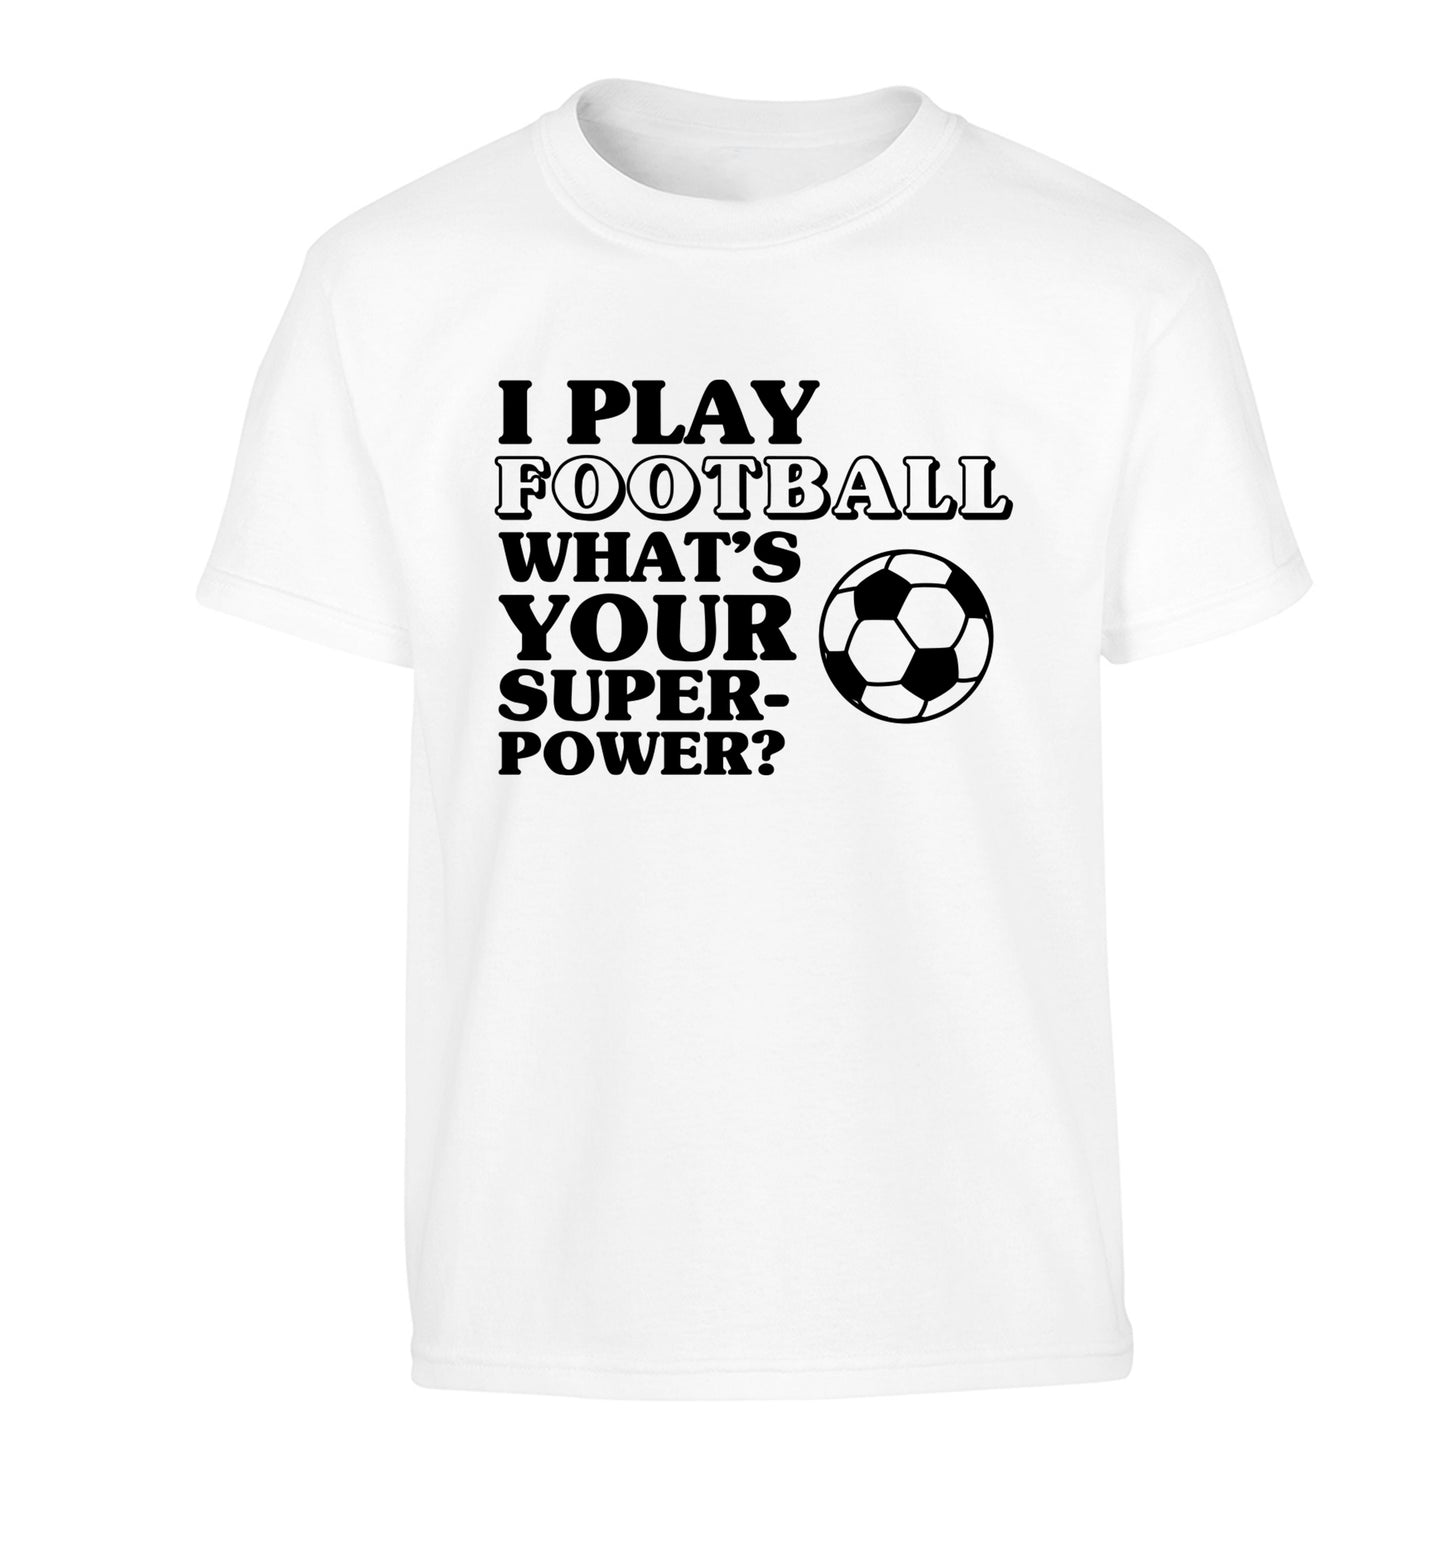 I play football what's your superpower? Children's white Tshirt 12-14 Years